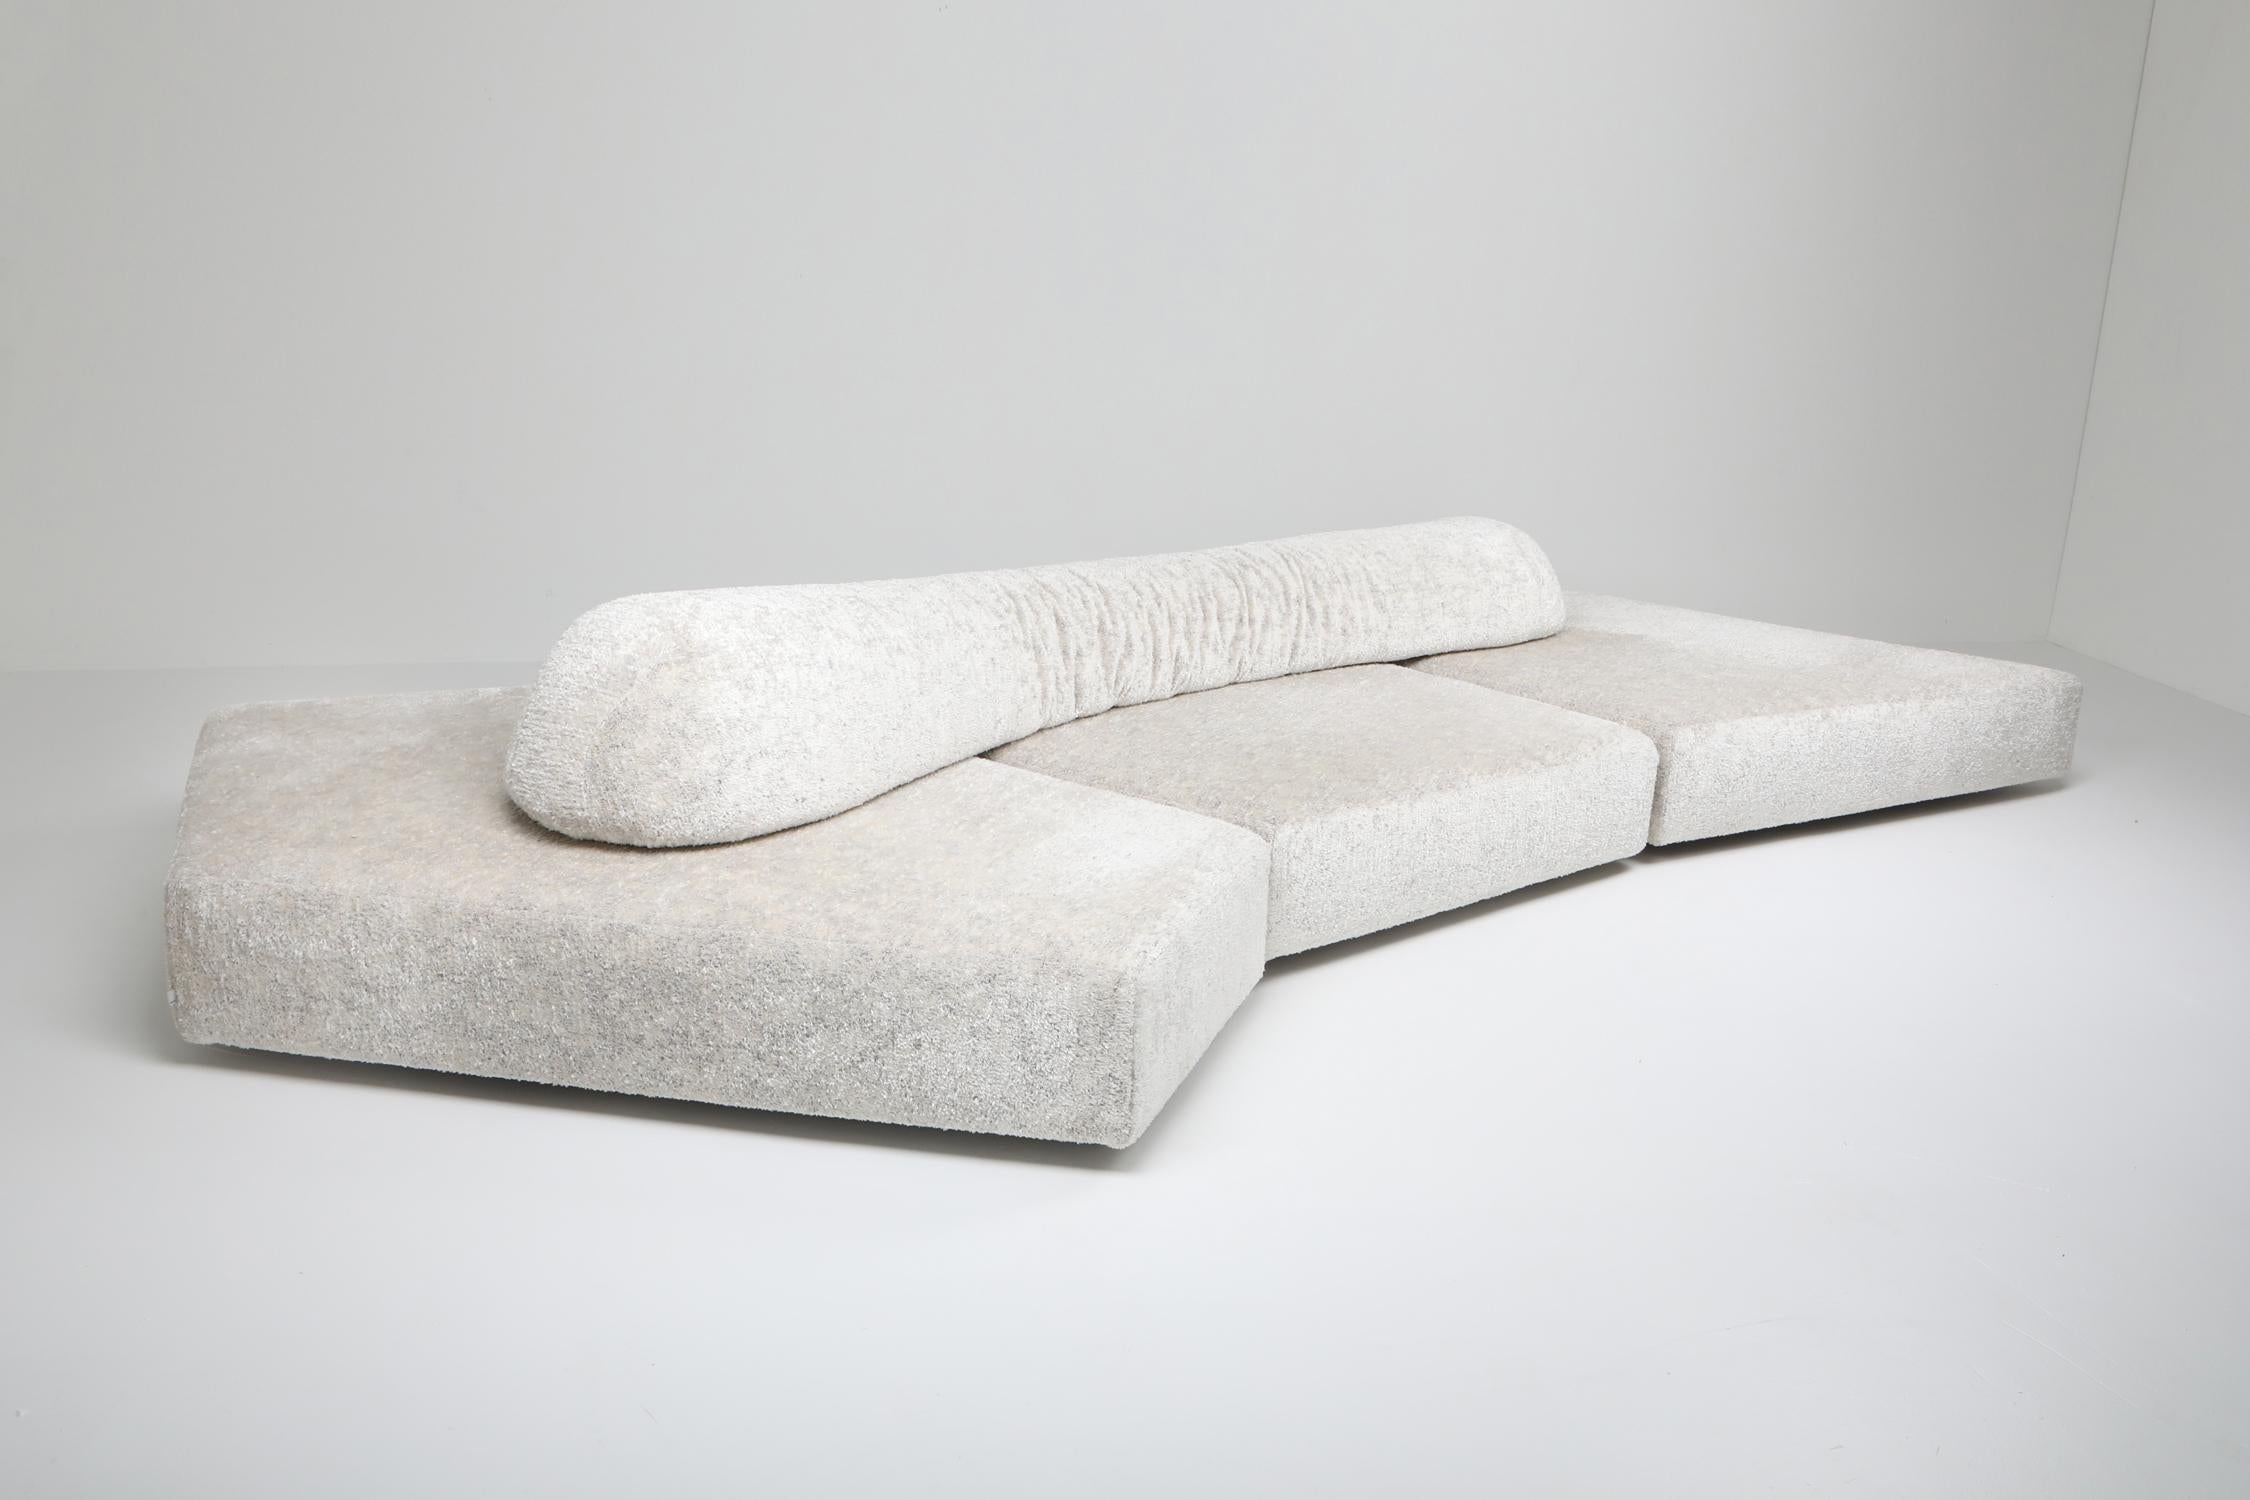 Sectional sofa, Francesco Binfare, Edra, Italy, 2010

Maximum modularity that uses elementary geometrical principles with great freedom and imagination. Wide and completely free of rigid structures. The fabric is designed on the texture of the